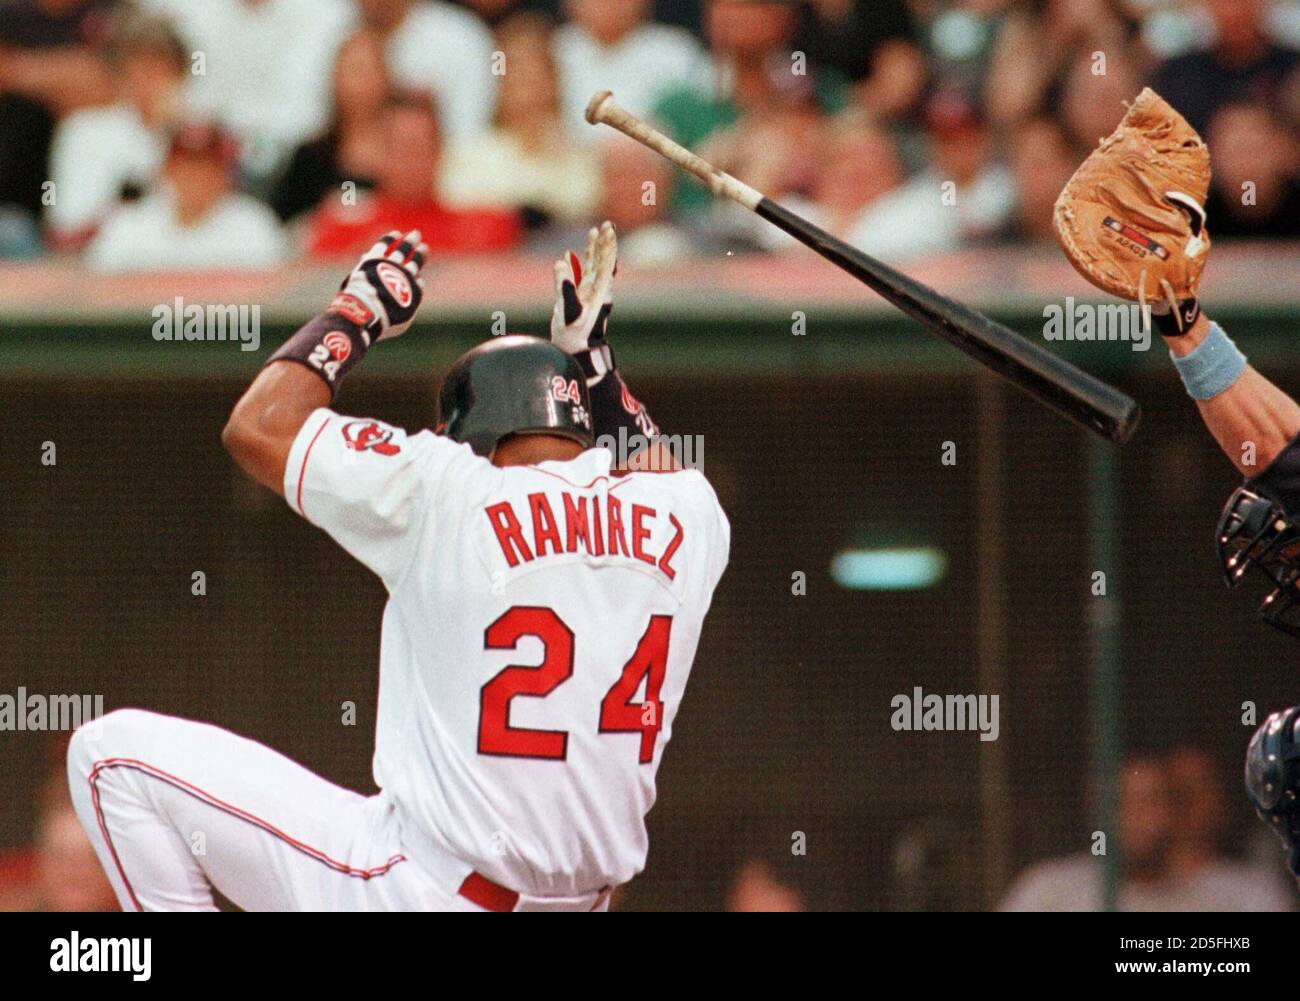 Cleveland Indians' clean up hitter Manny Ramirez is hit by a pitch thrown  by Seattle Mariners' pitcher Frankie Rodriguez in the first inning, June 20  at Jacobs Field in Cleveland. Ramirez, currently